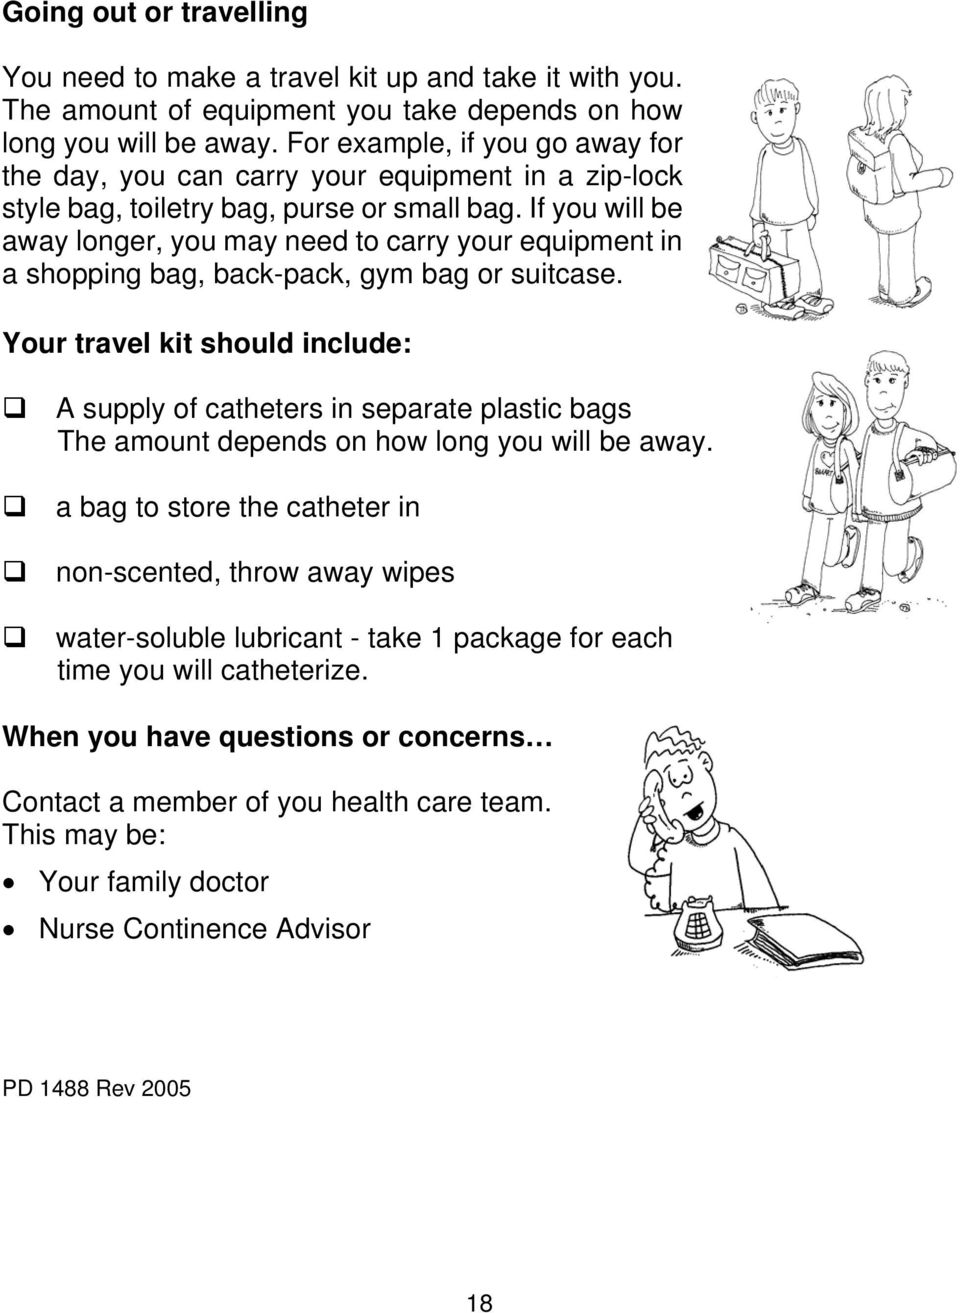 If you will be away longer, you may need to carry your equipment in a shopping bag, back-pack, gym bag or suitcase.